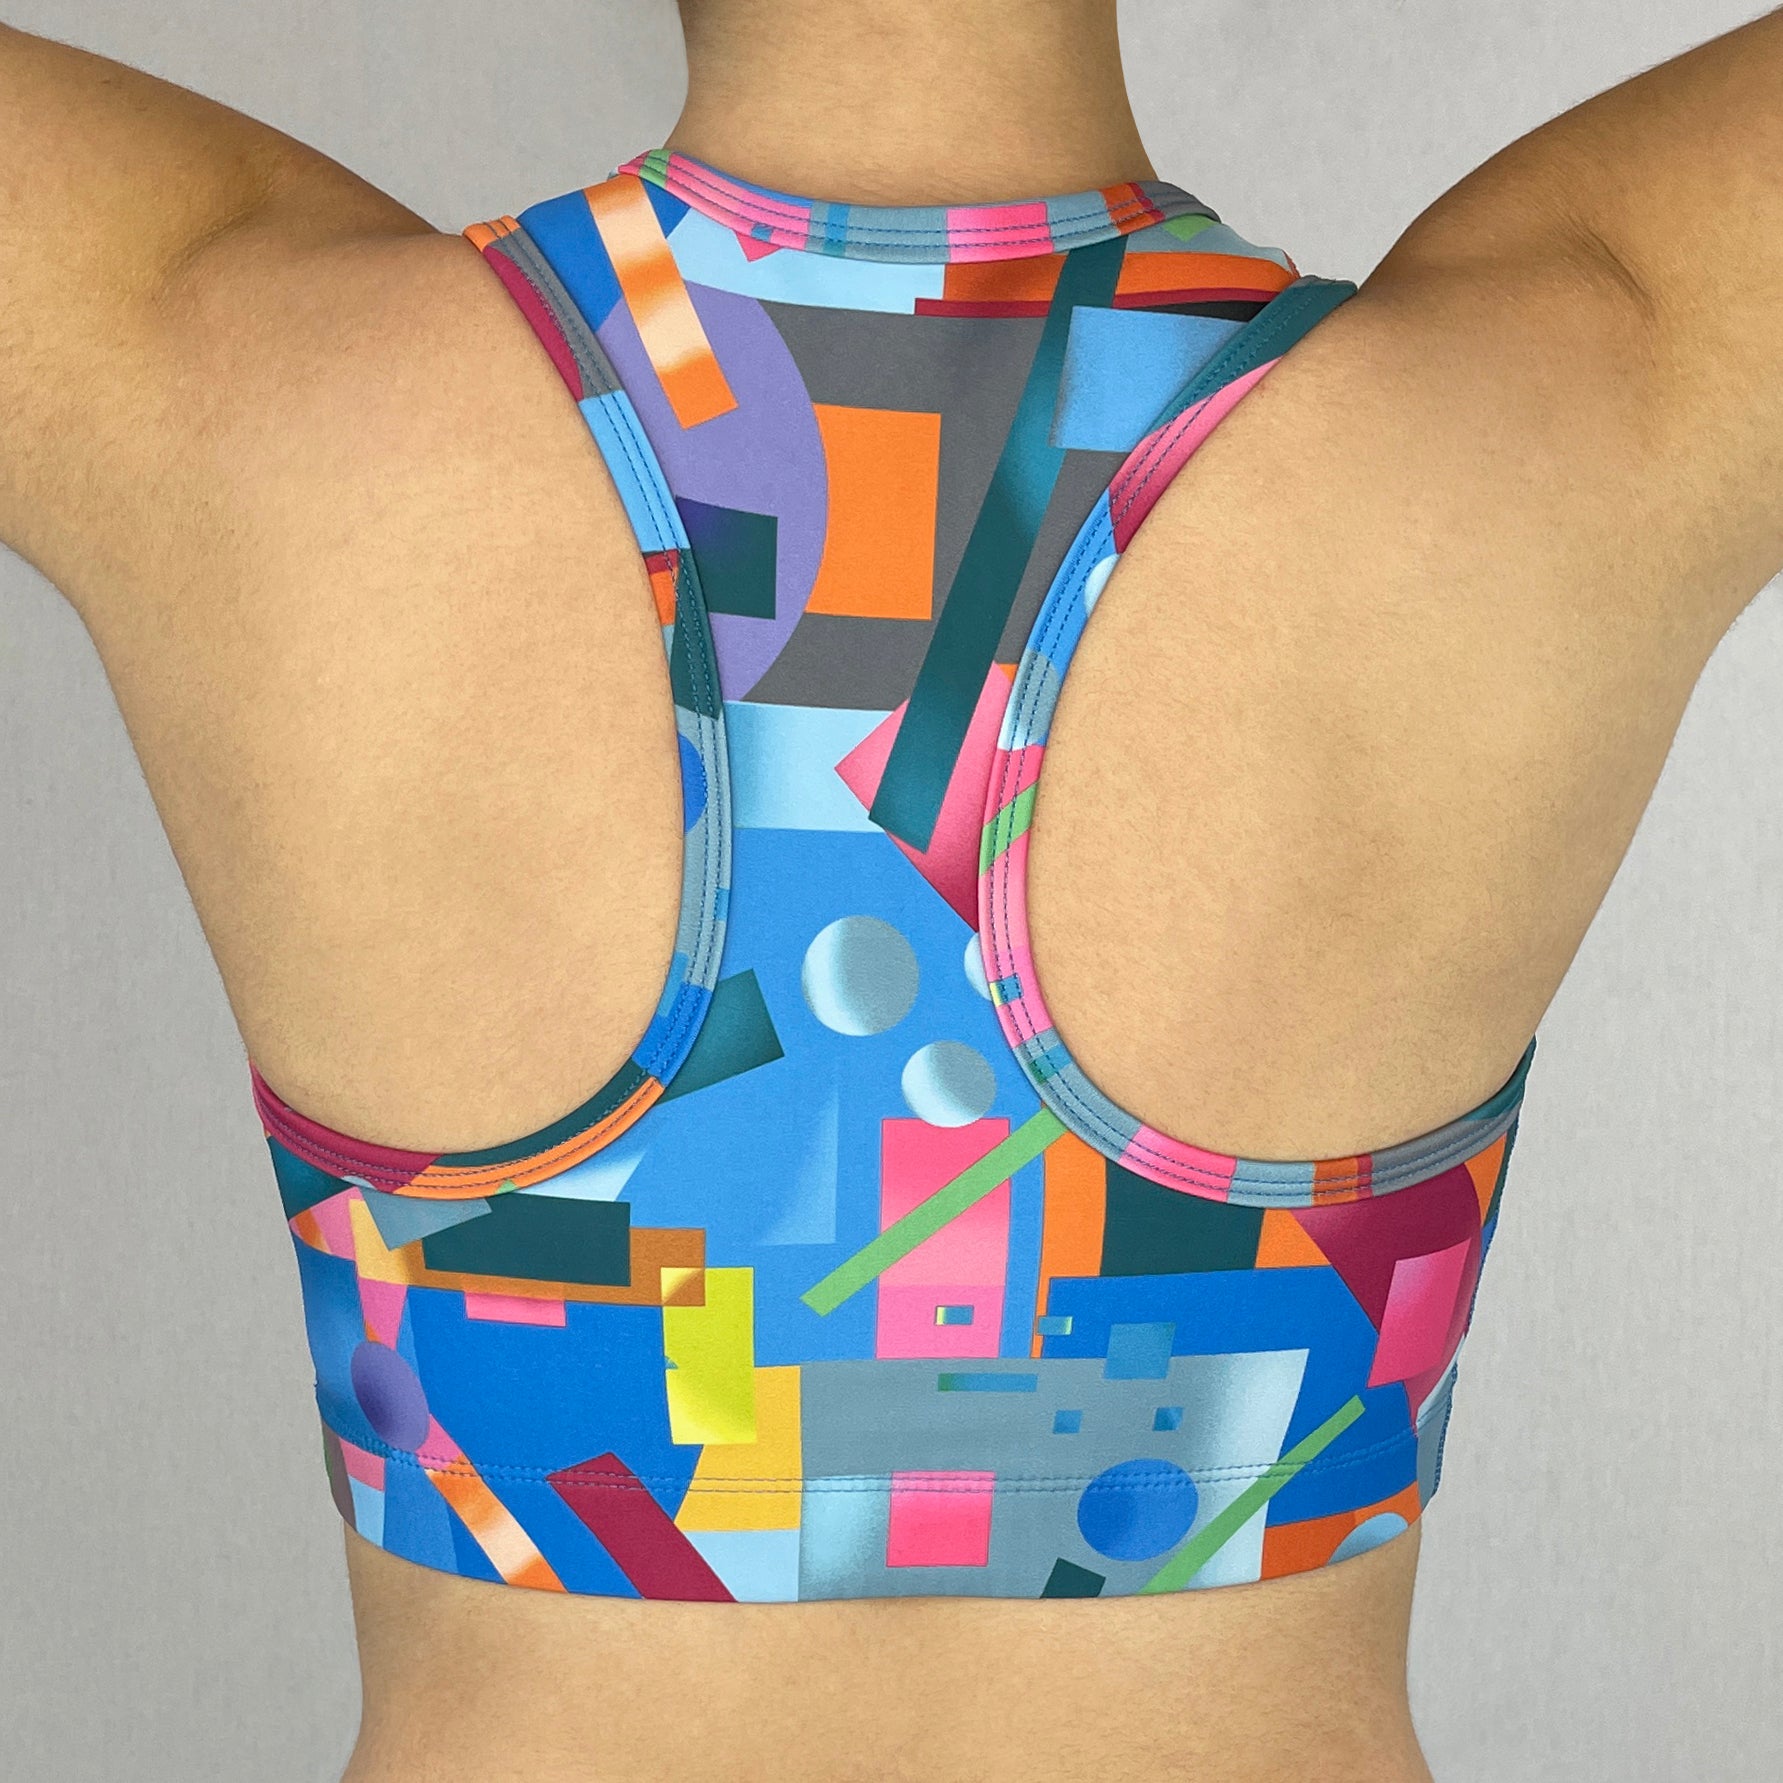 colourful sports bra made sustainably from recycled materials - Geometric - back